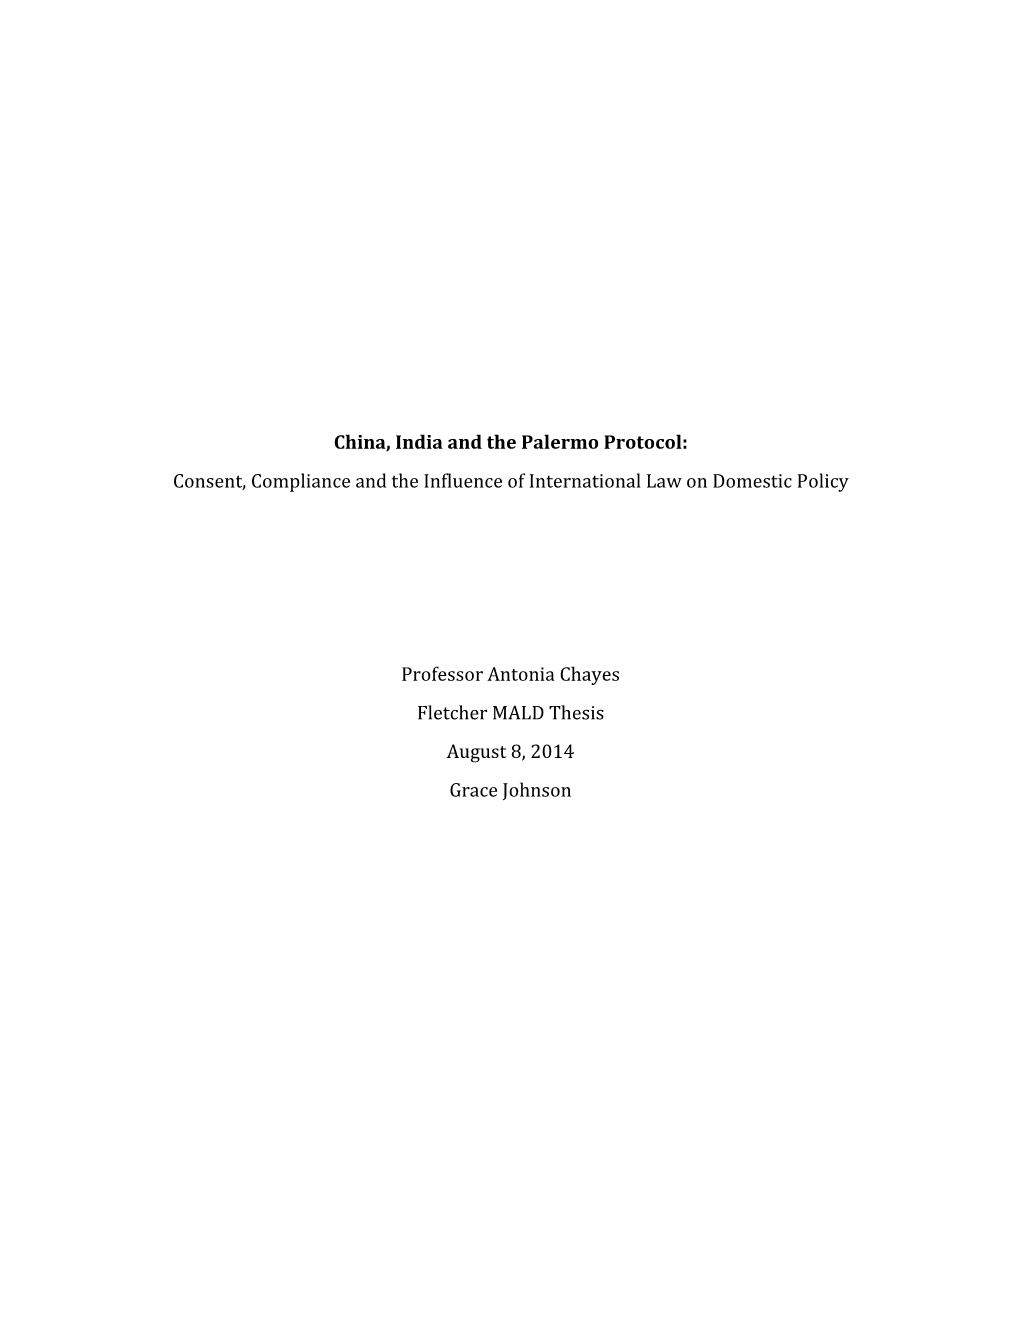 China, India and the Palermo Protocol: Consent, Compliance and the Influence of International Law on Domestic Policy